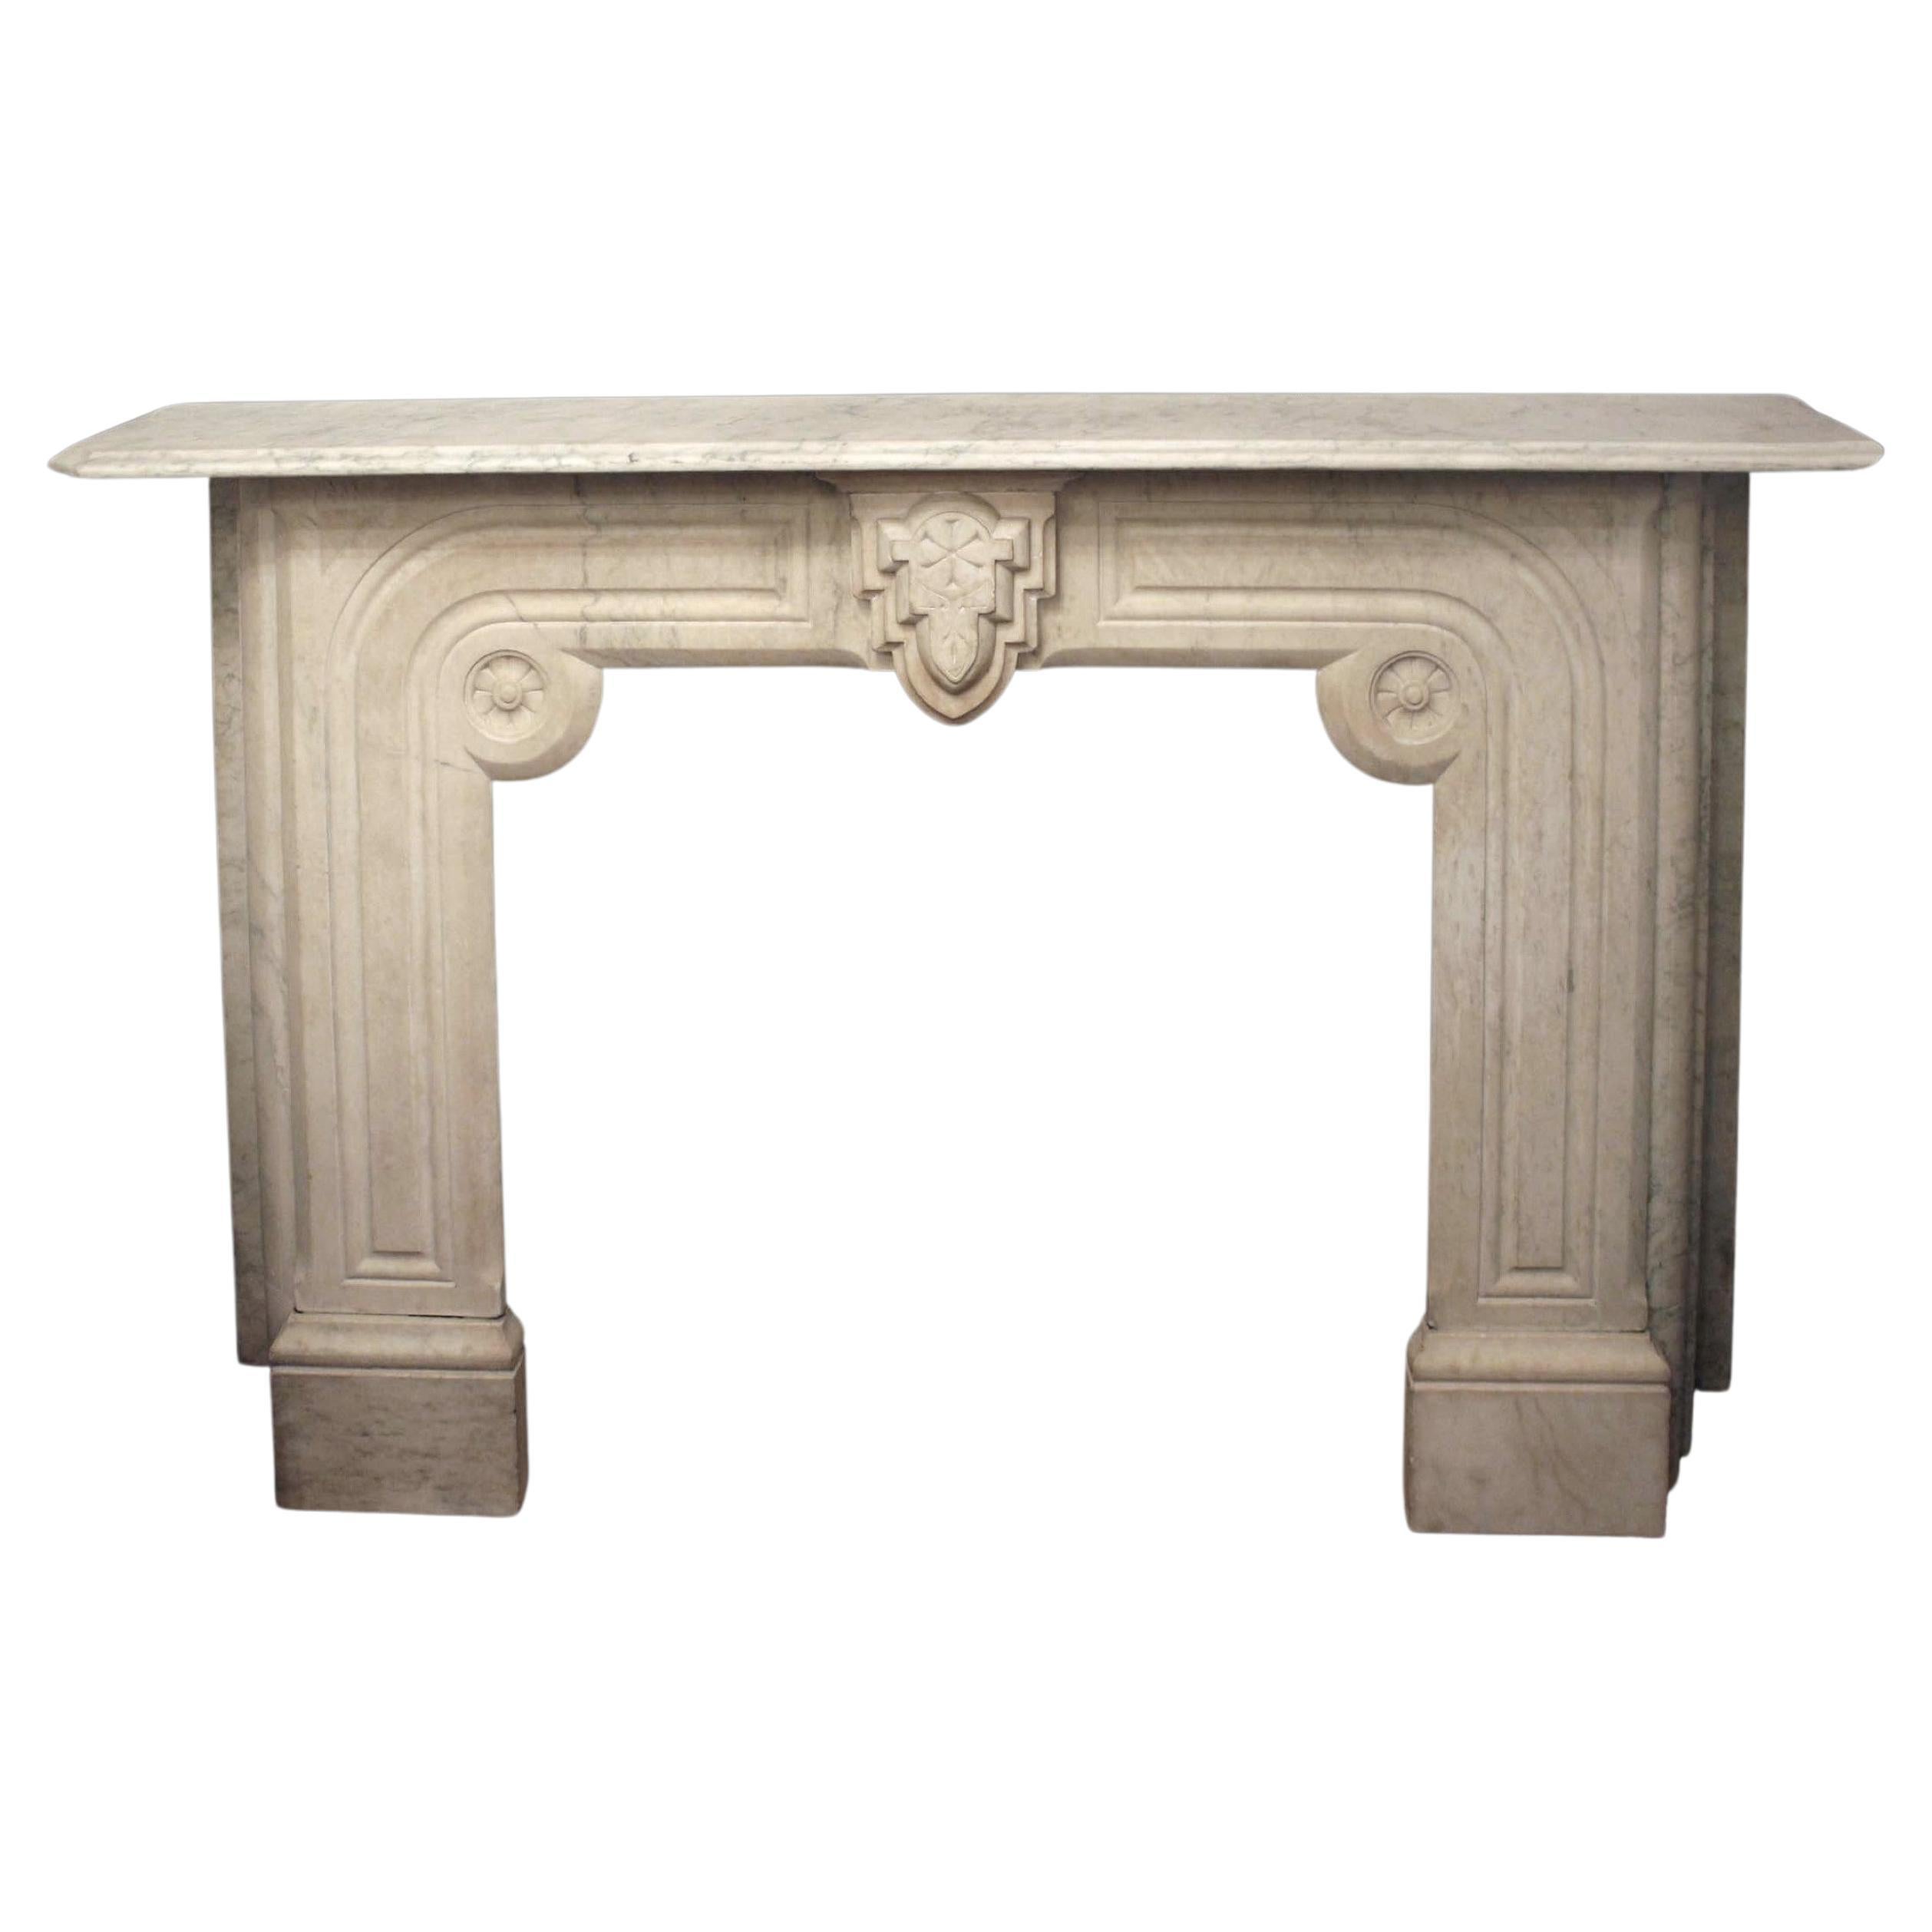 1920s Hand Carved Marble Mantel Geometric Floral Details For Sale